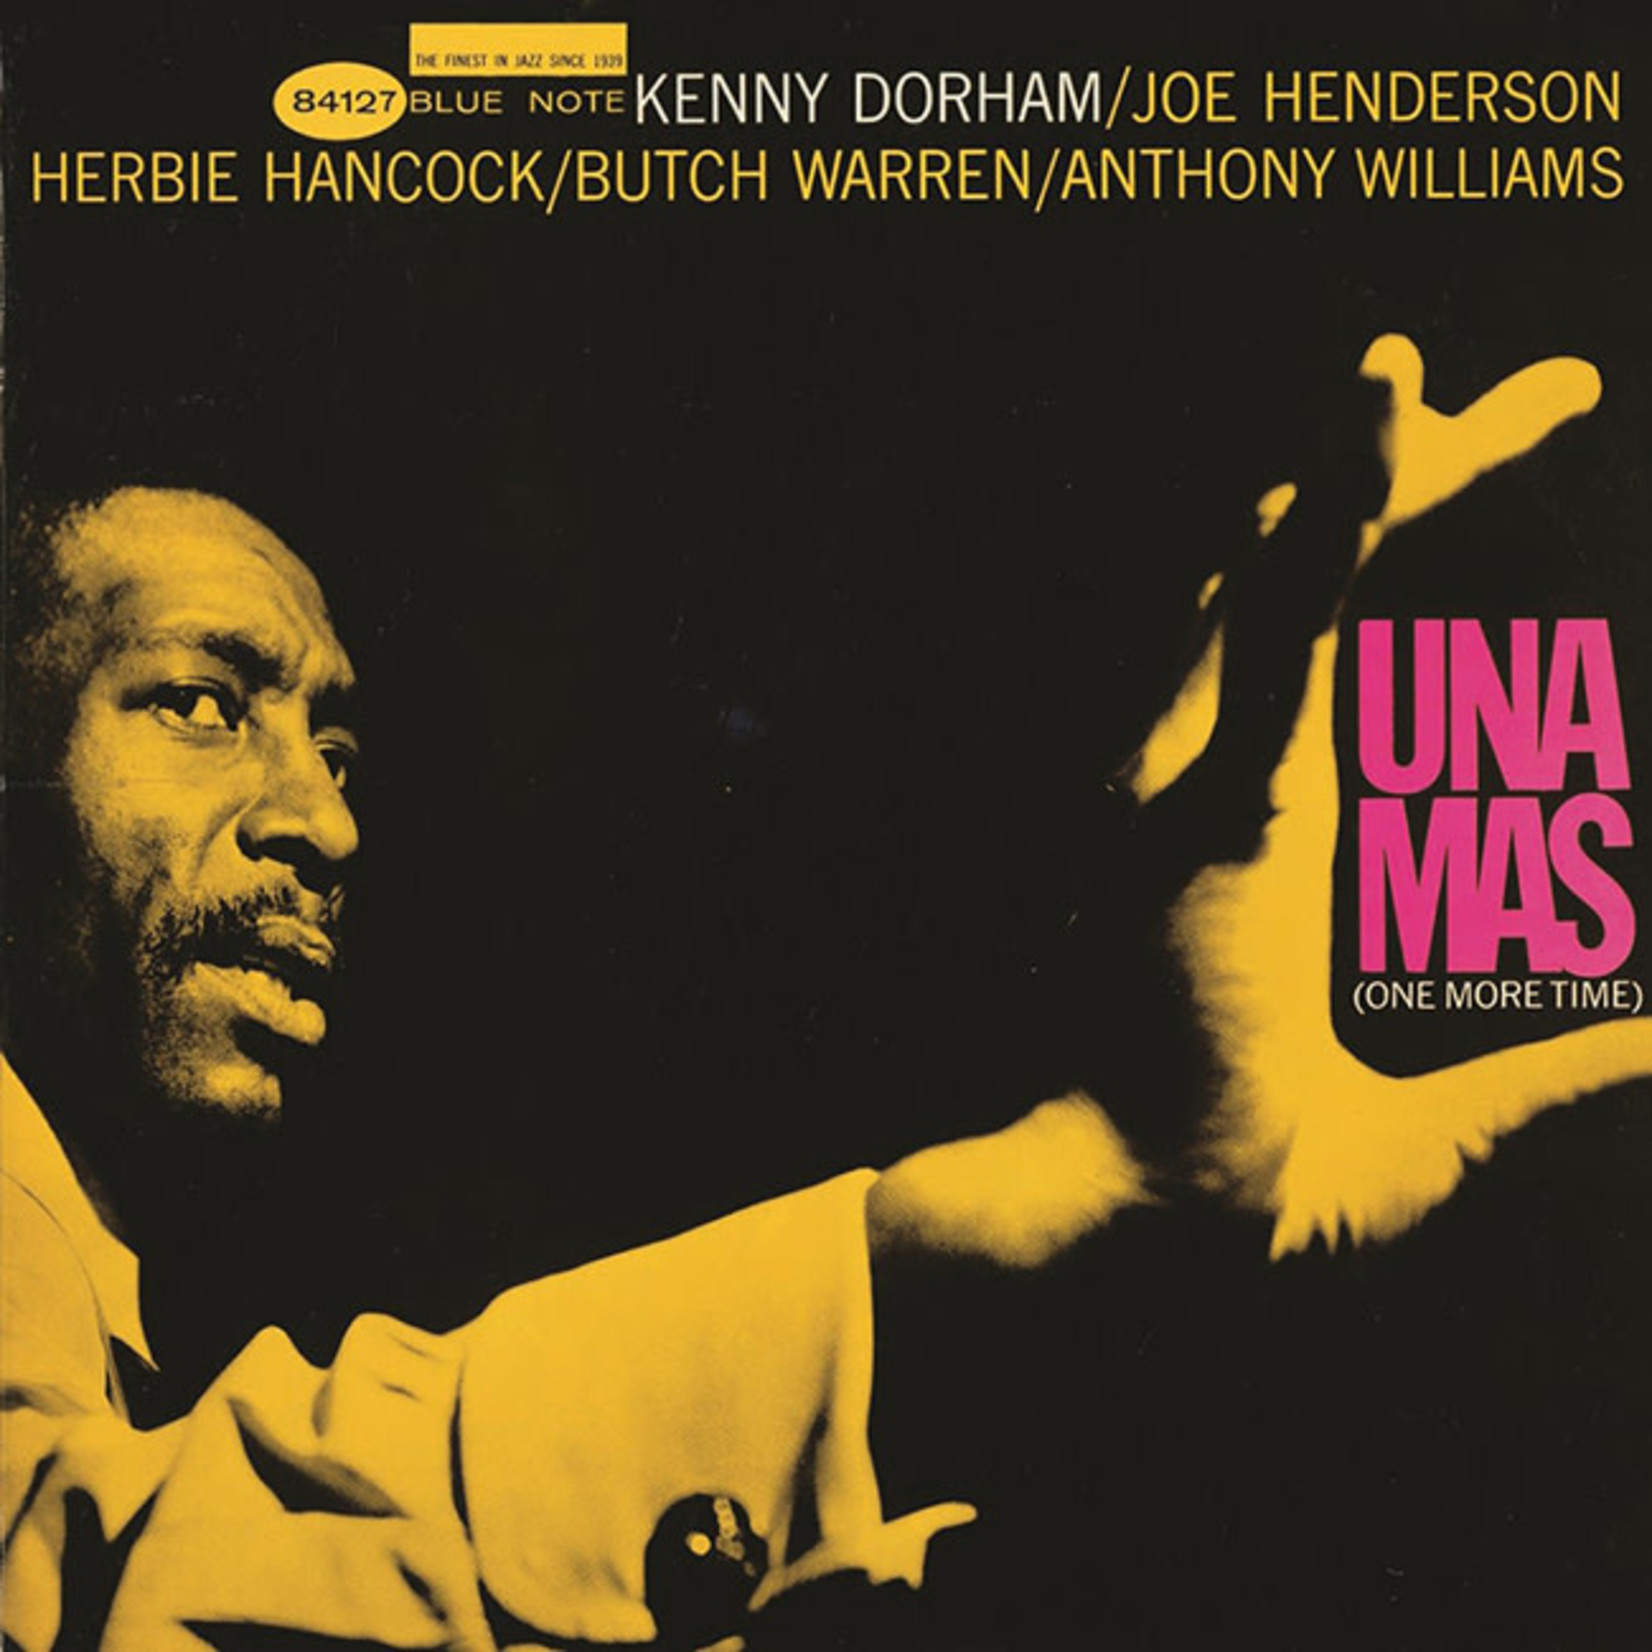 [New] Kenny Dorham - Una Mas - One More Time (Blue Note 80 Series)